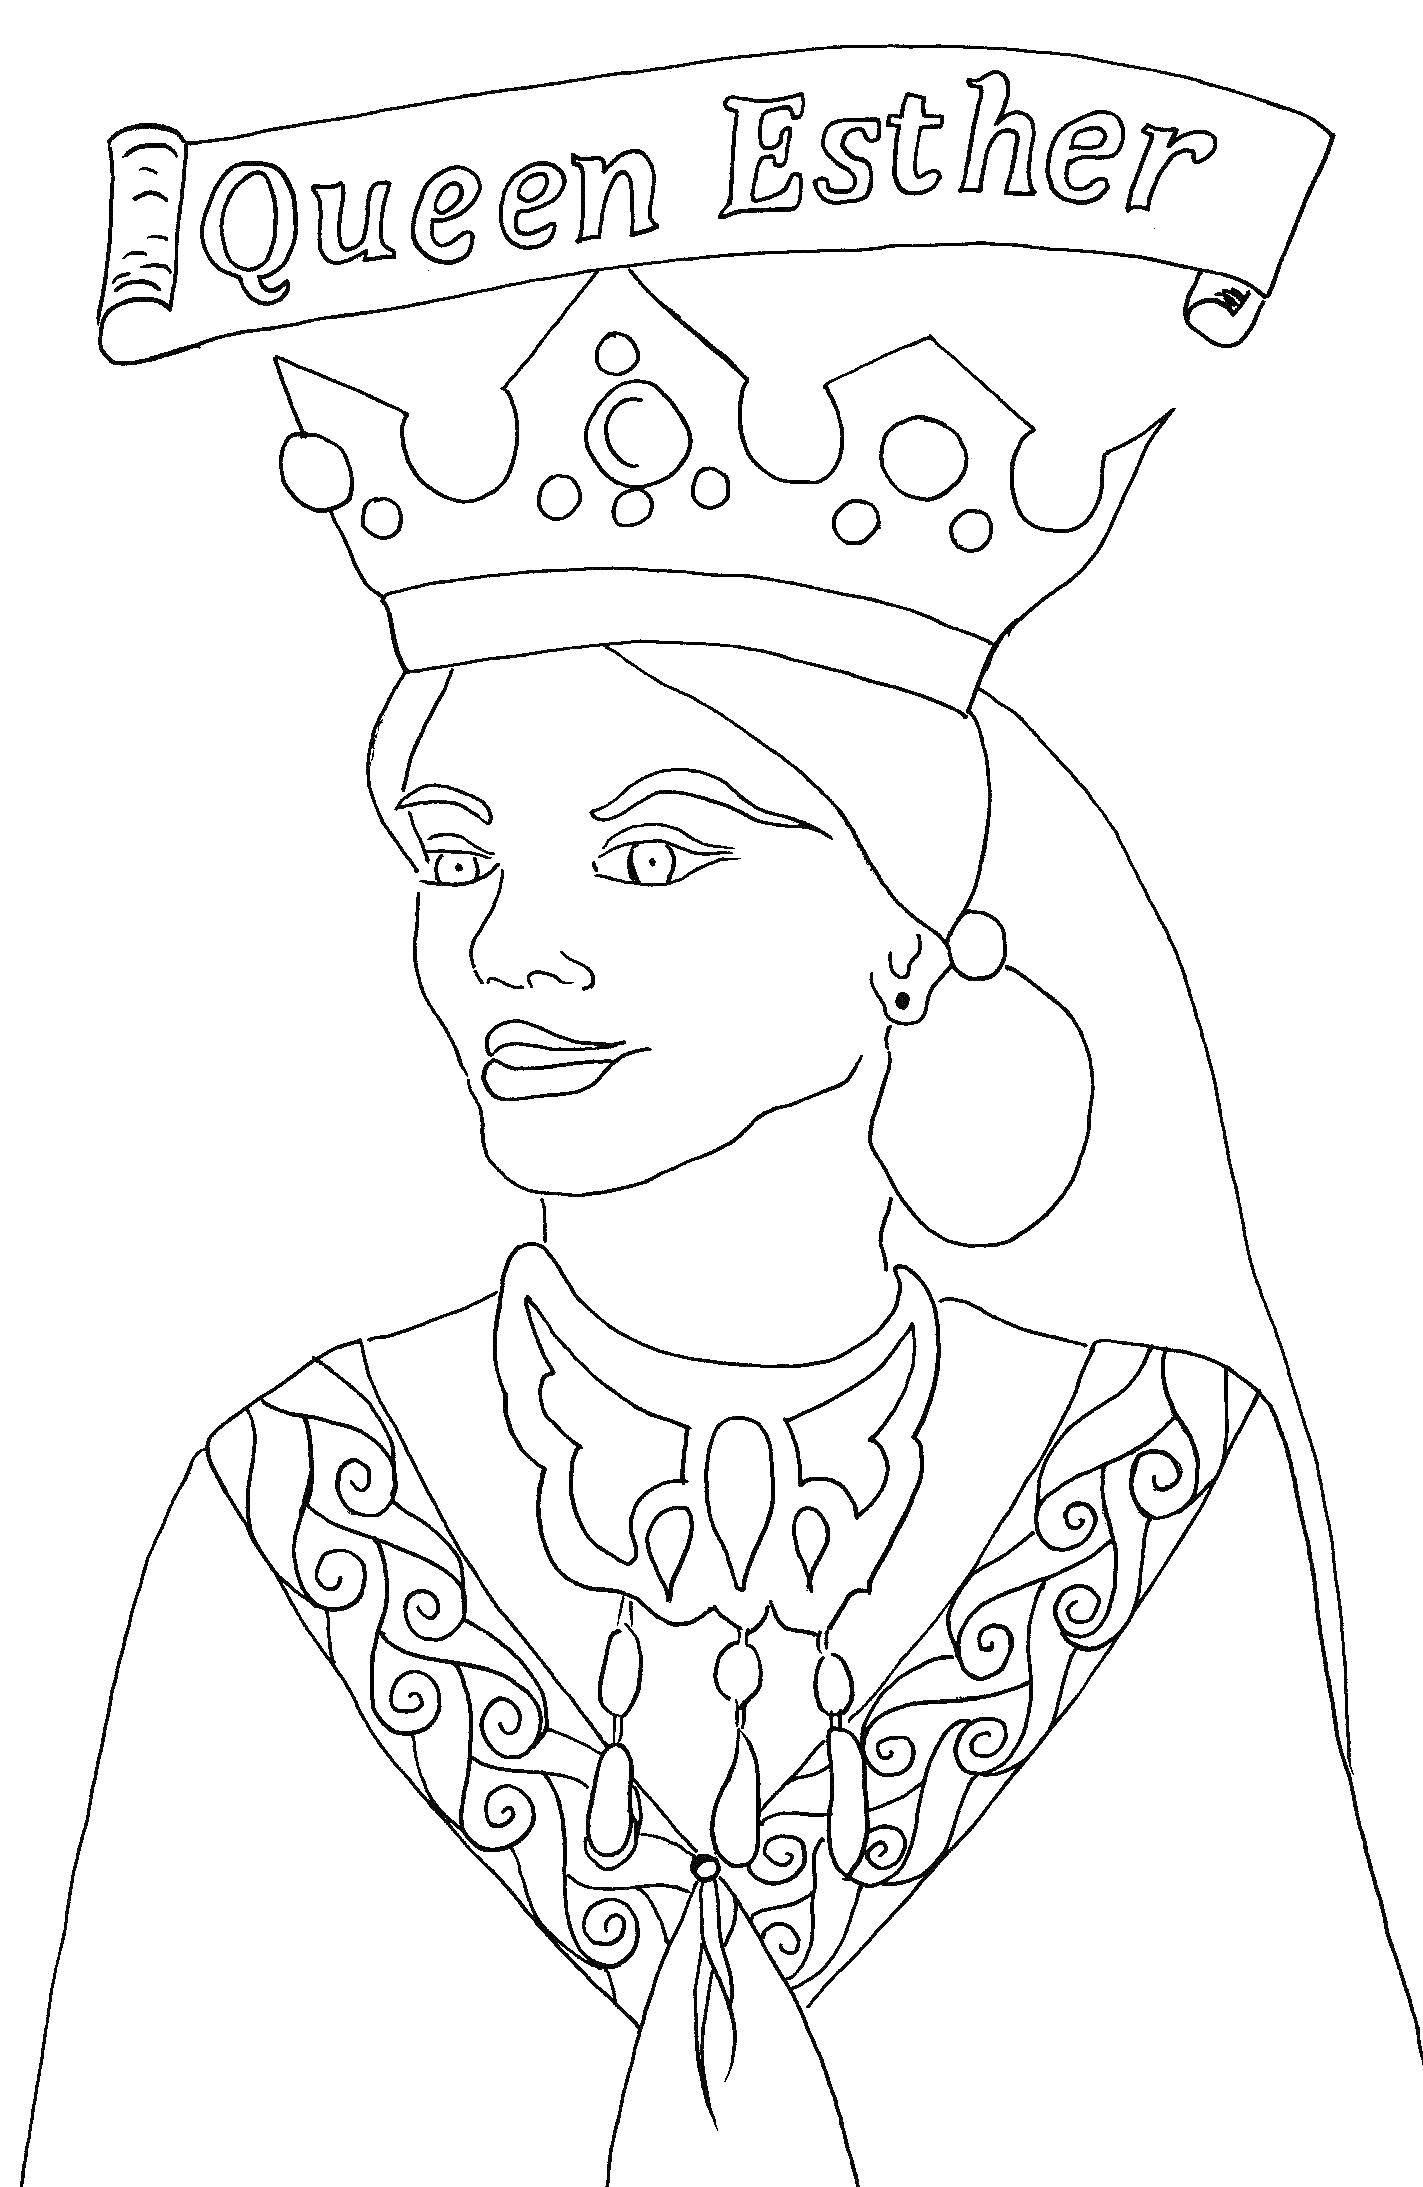 Coloring Queen Esther. Category The Queen. Tags:  The king, the Queen.